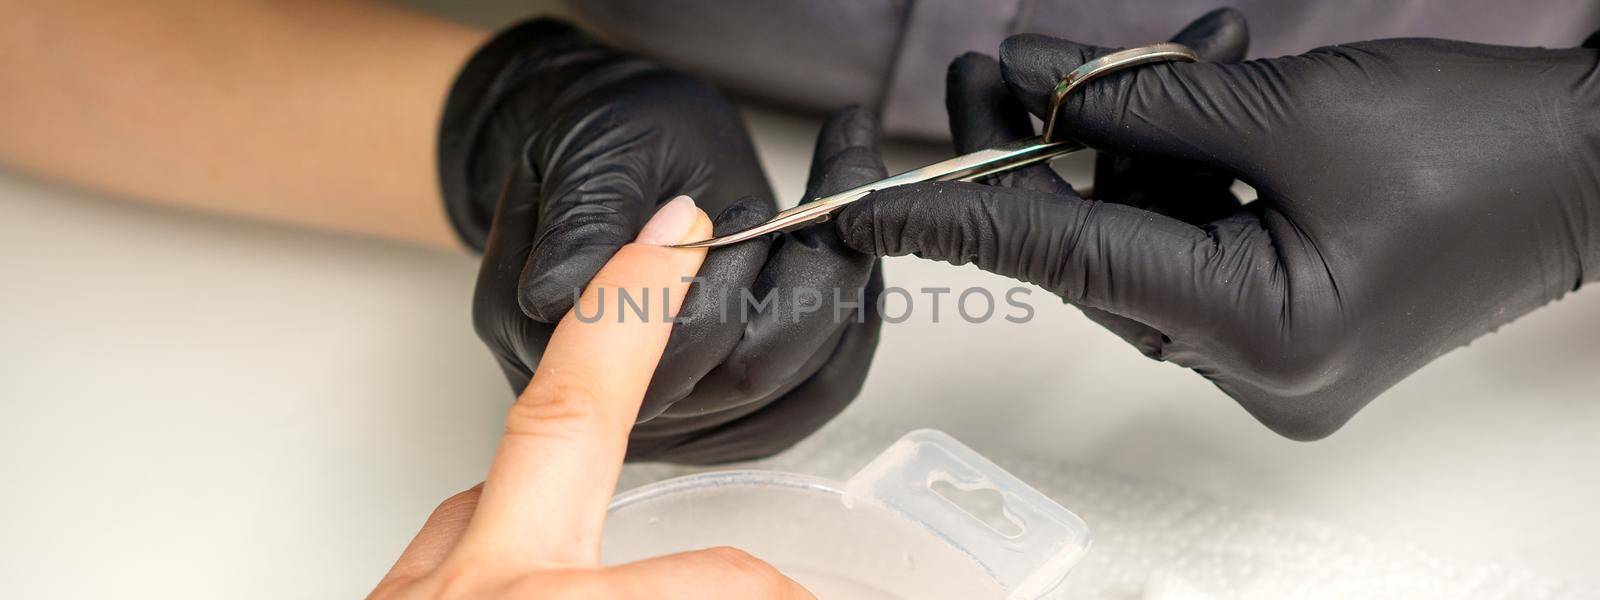 Manicure master removes cuticles from female nails with scissors wearing protective gloves in manicure salon. by okskukuruza